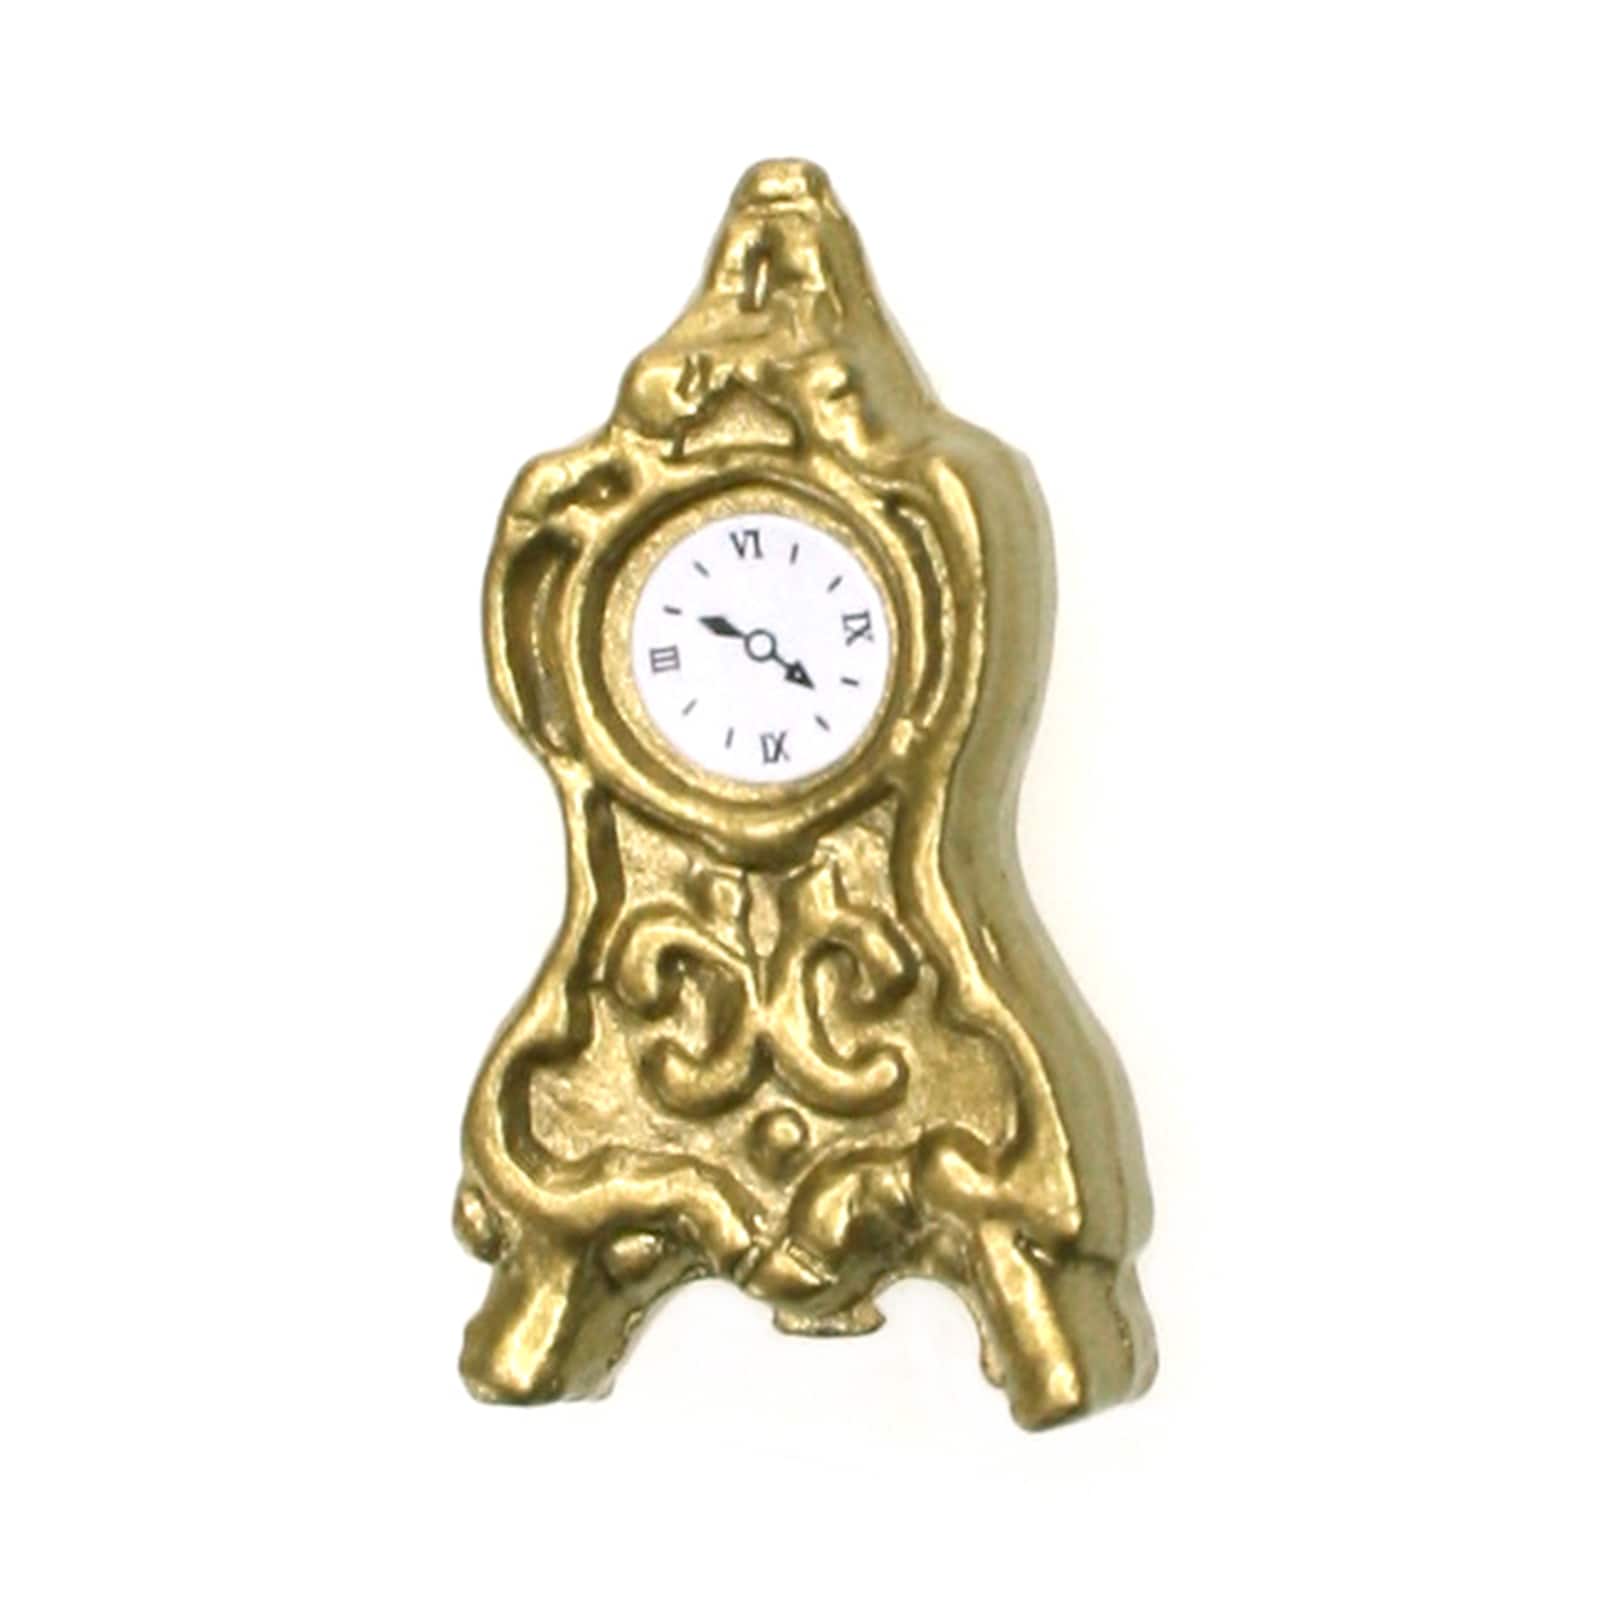 Buy The Sparrow Innovations Miniatures Ornate Clock At Michaels